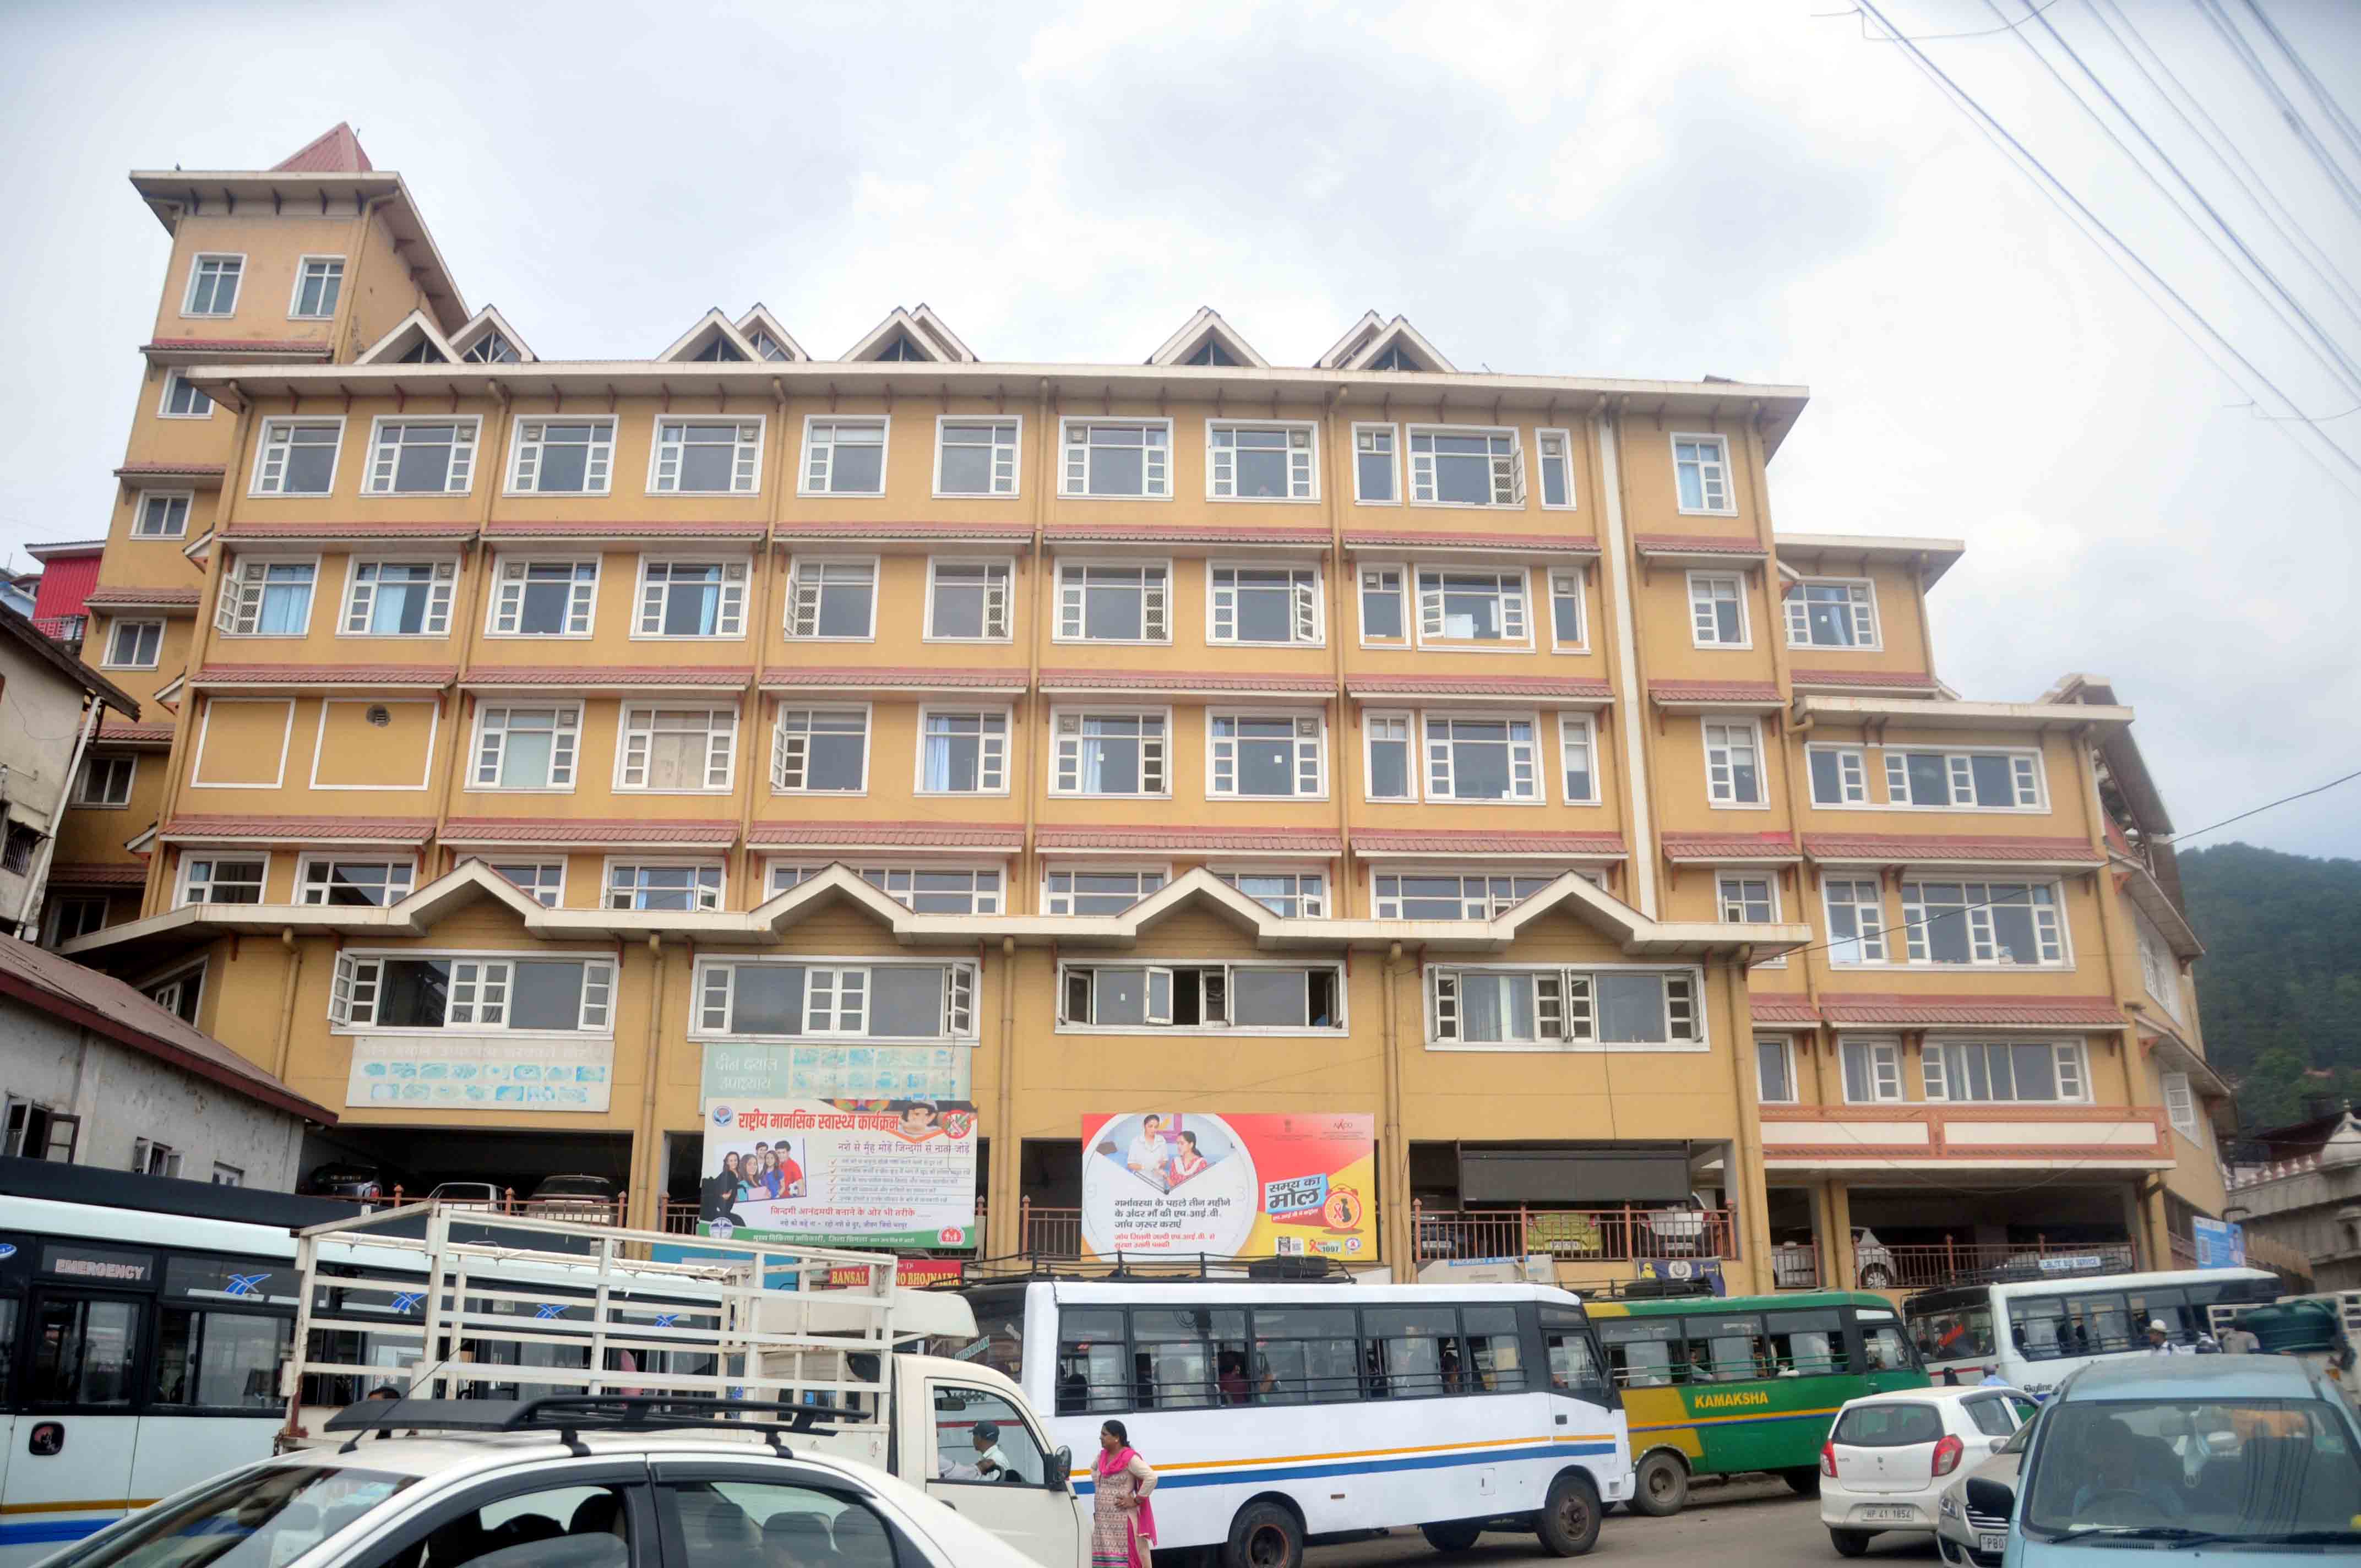 No anaesthetists, surgeries on hold at DDU Hospital in Shimla